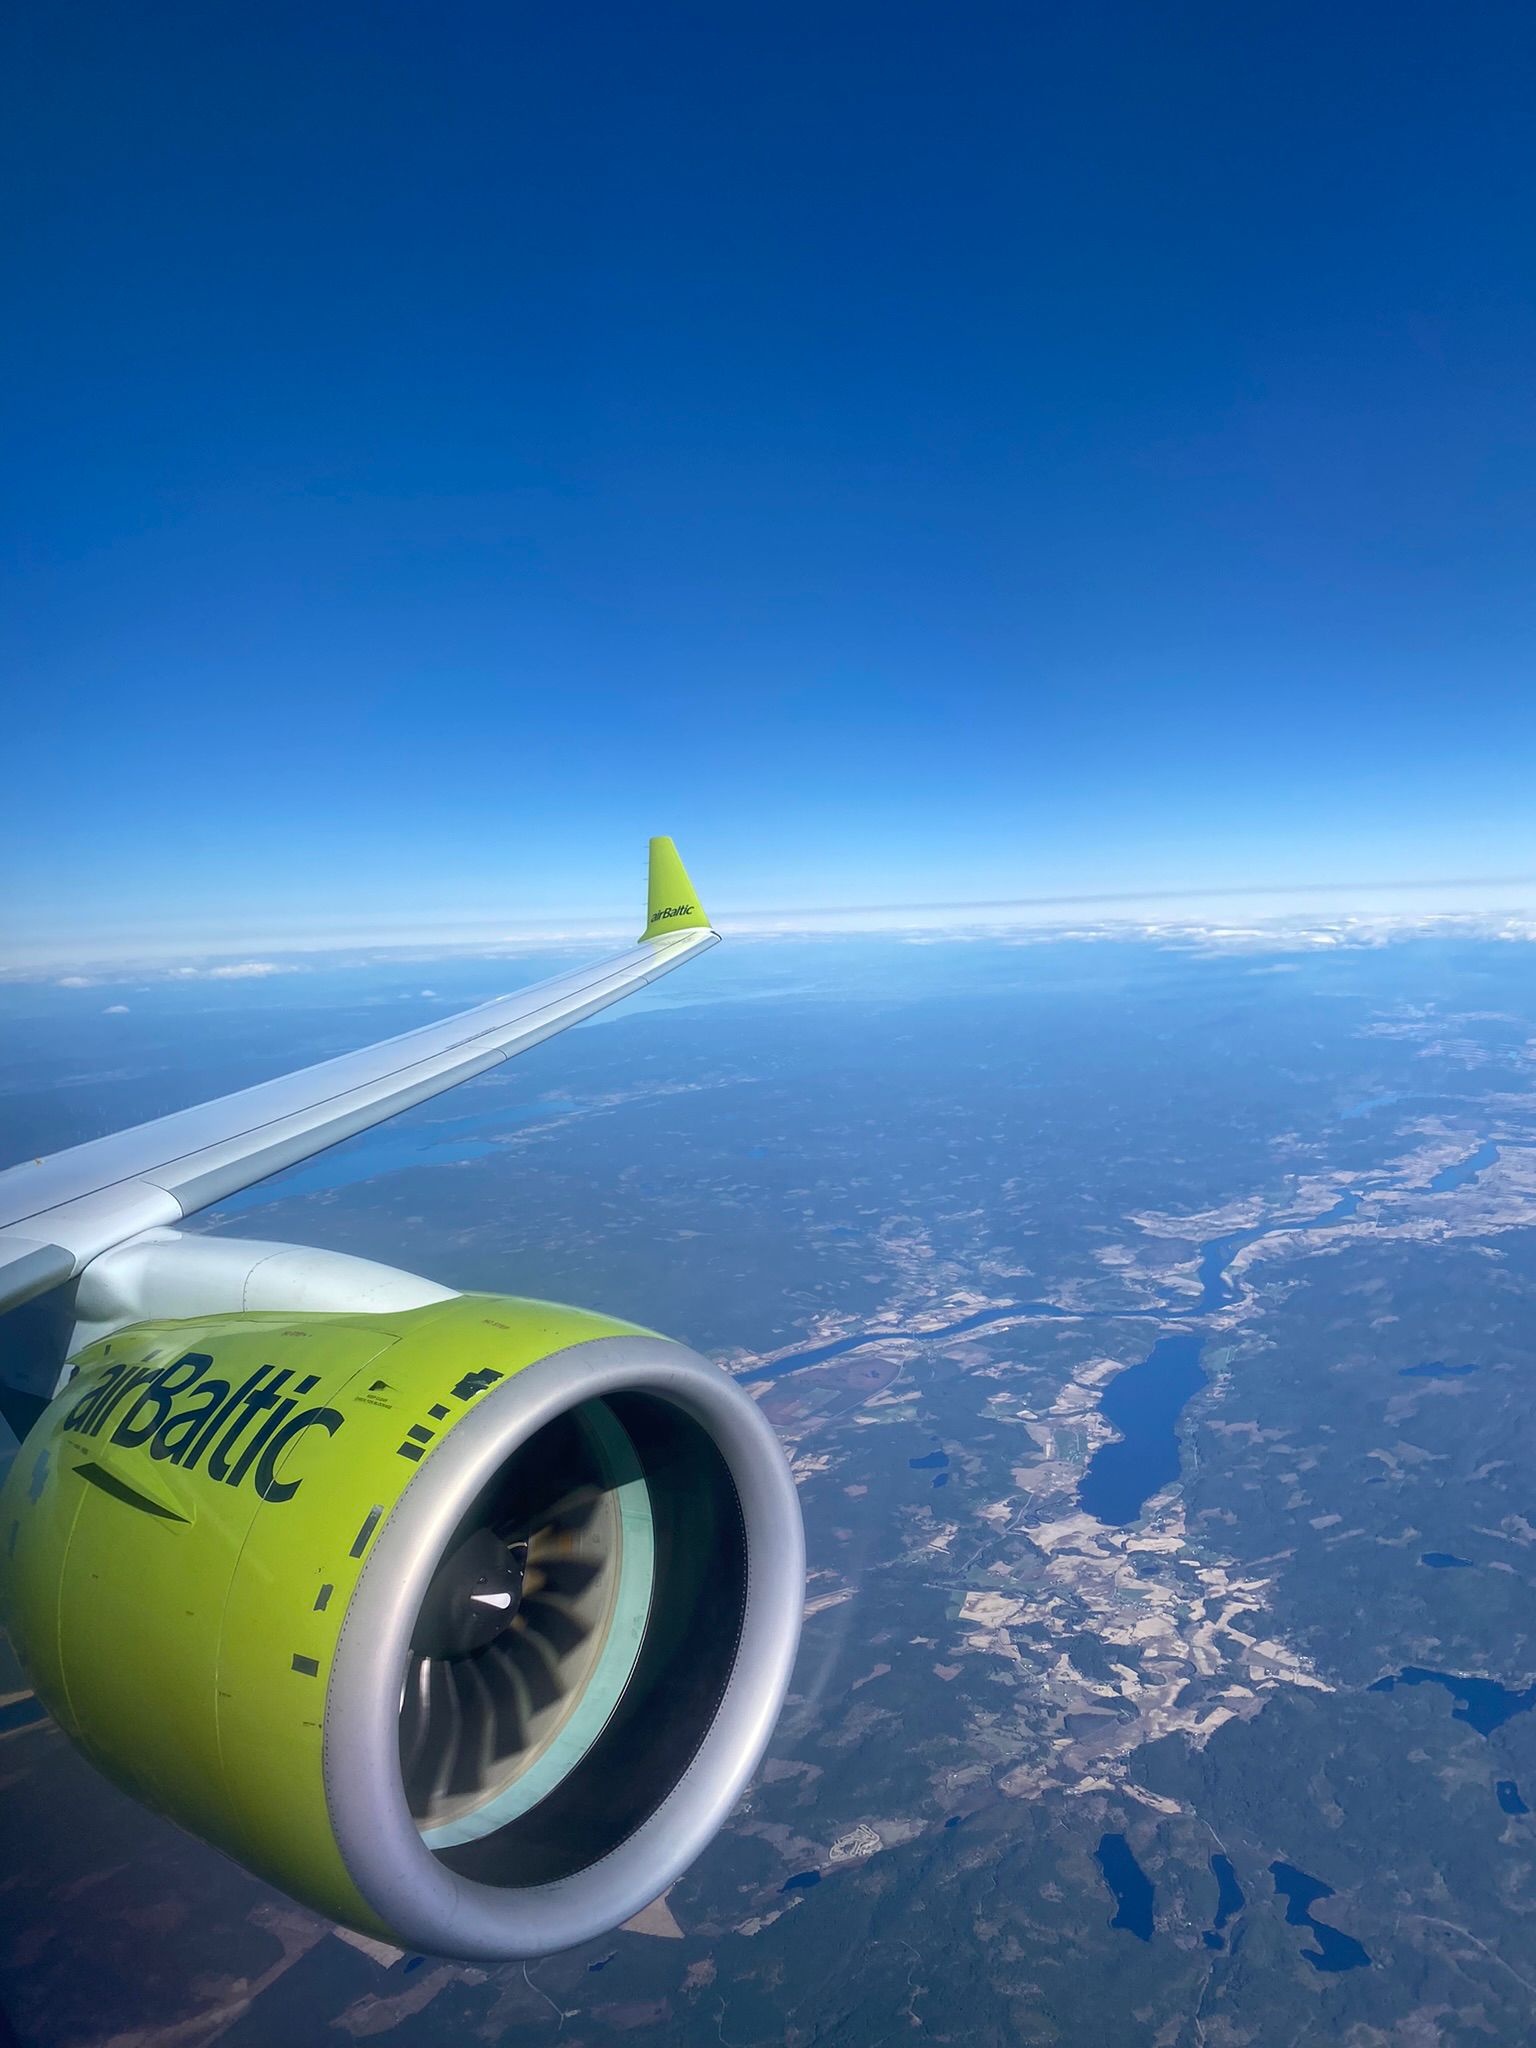 A view from the cabin window of an airbaltic Airbus flying enroute to Riga.